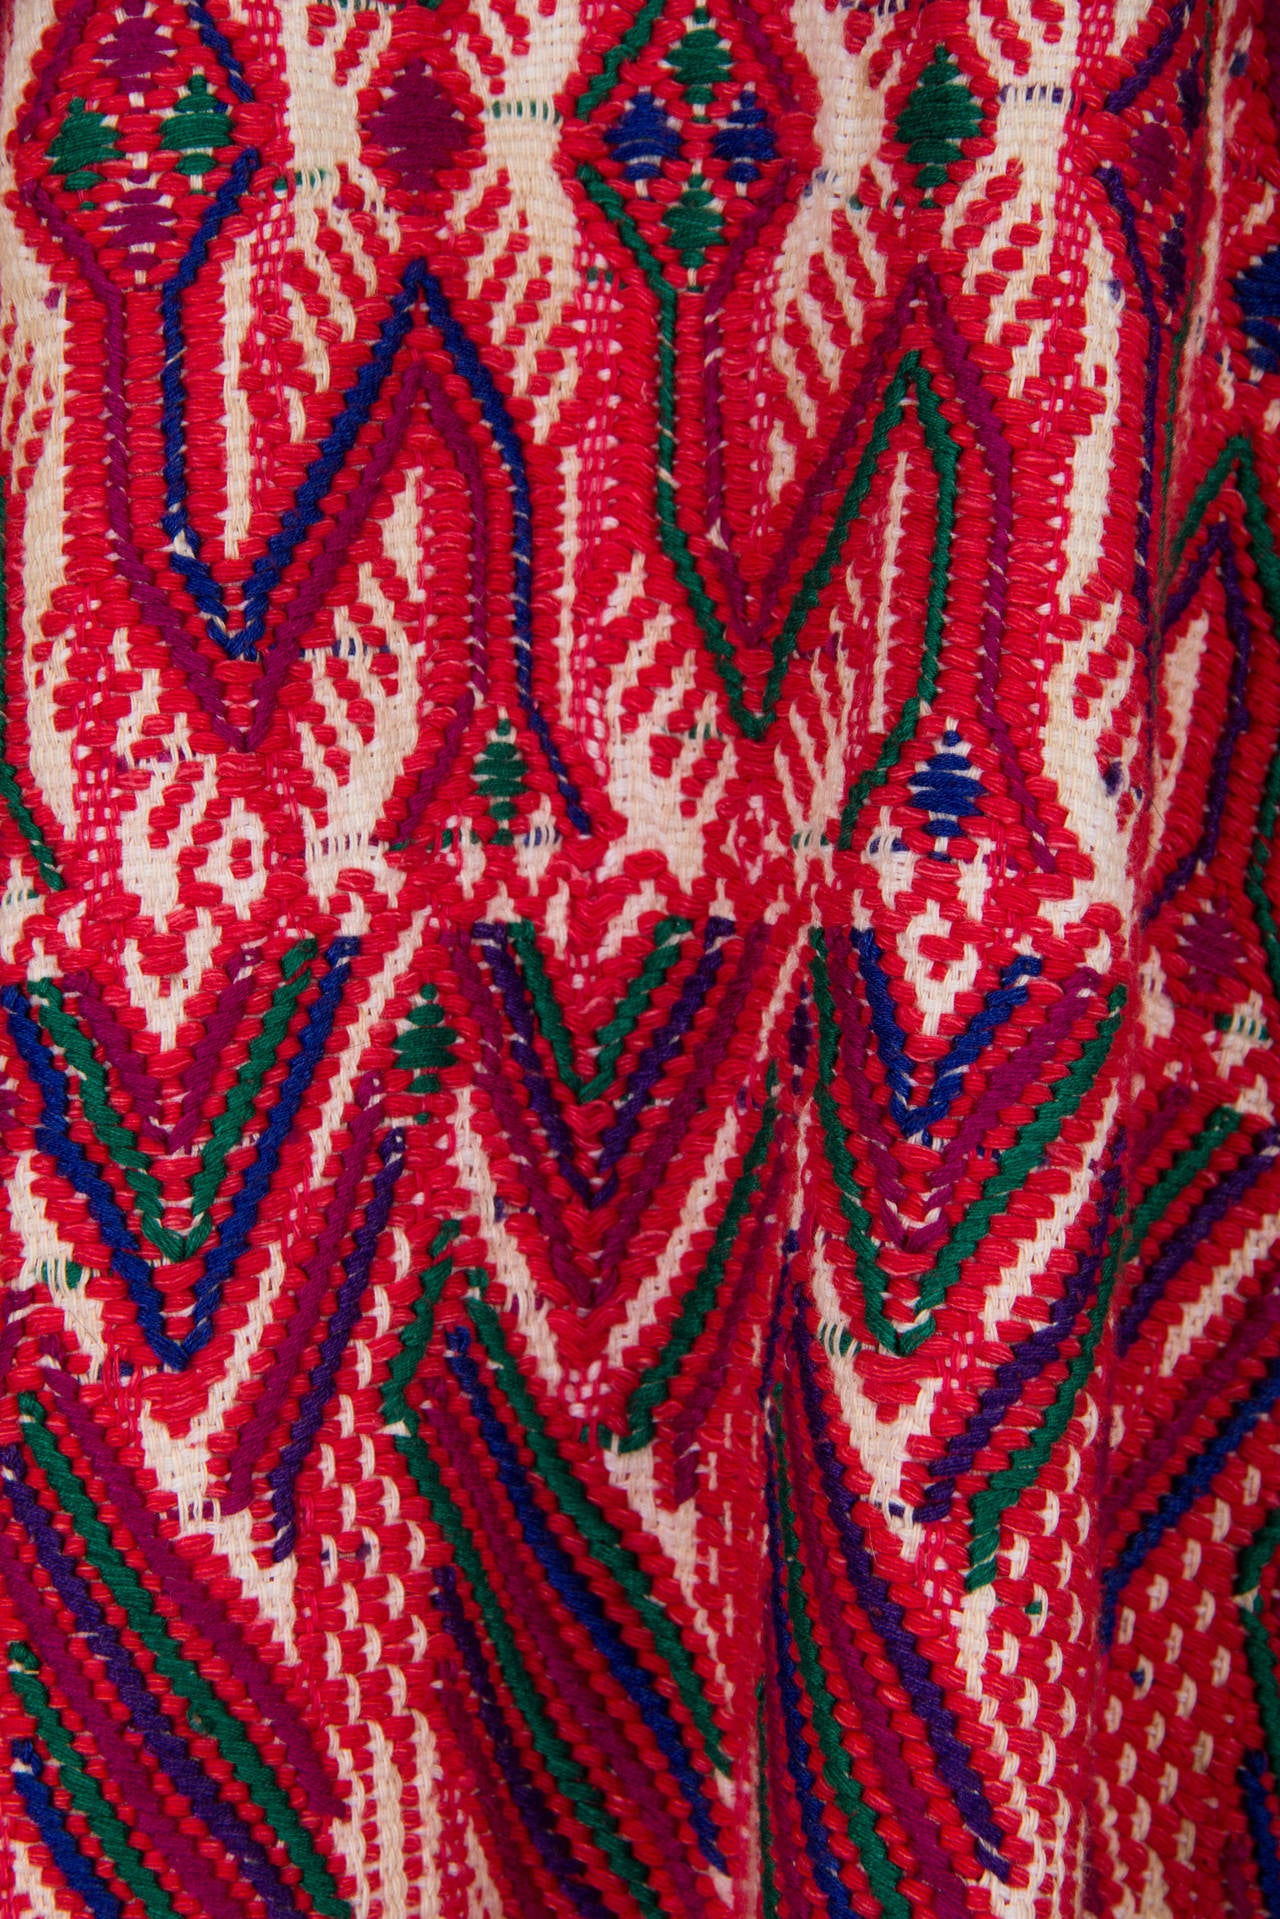 South American Ethnic Embroidery 2